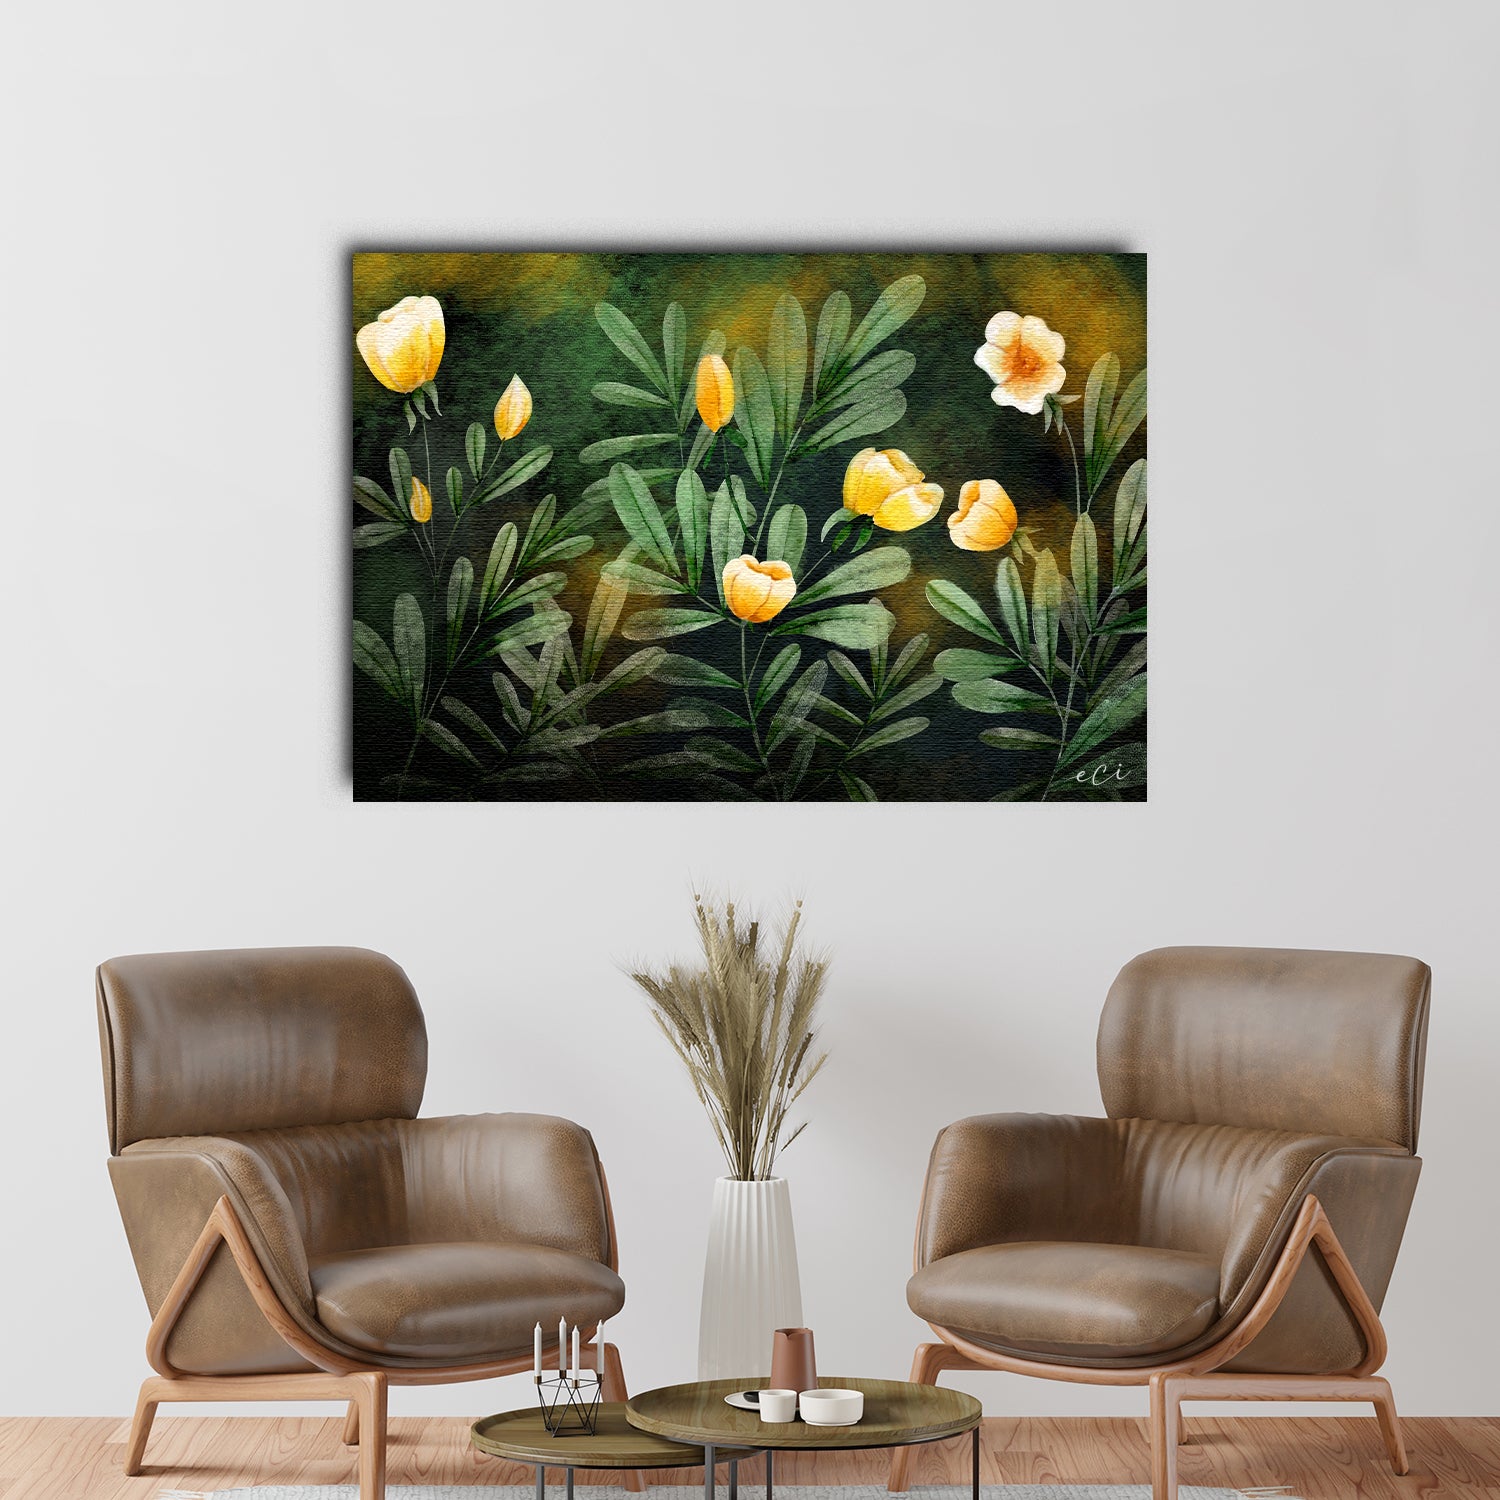 Topical Leaves Original Design Canvas Printed Wall Painting